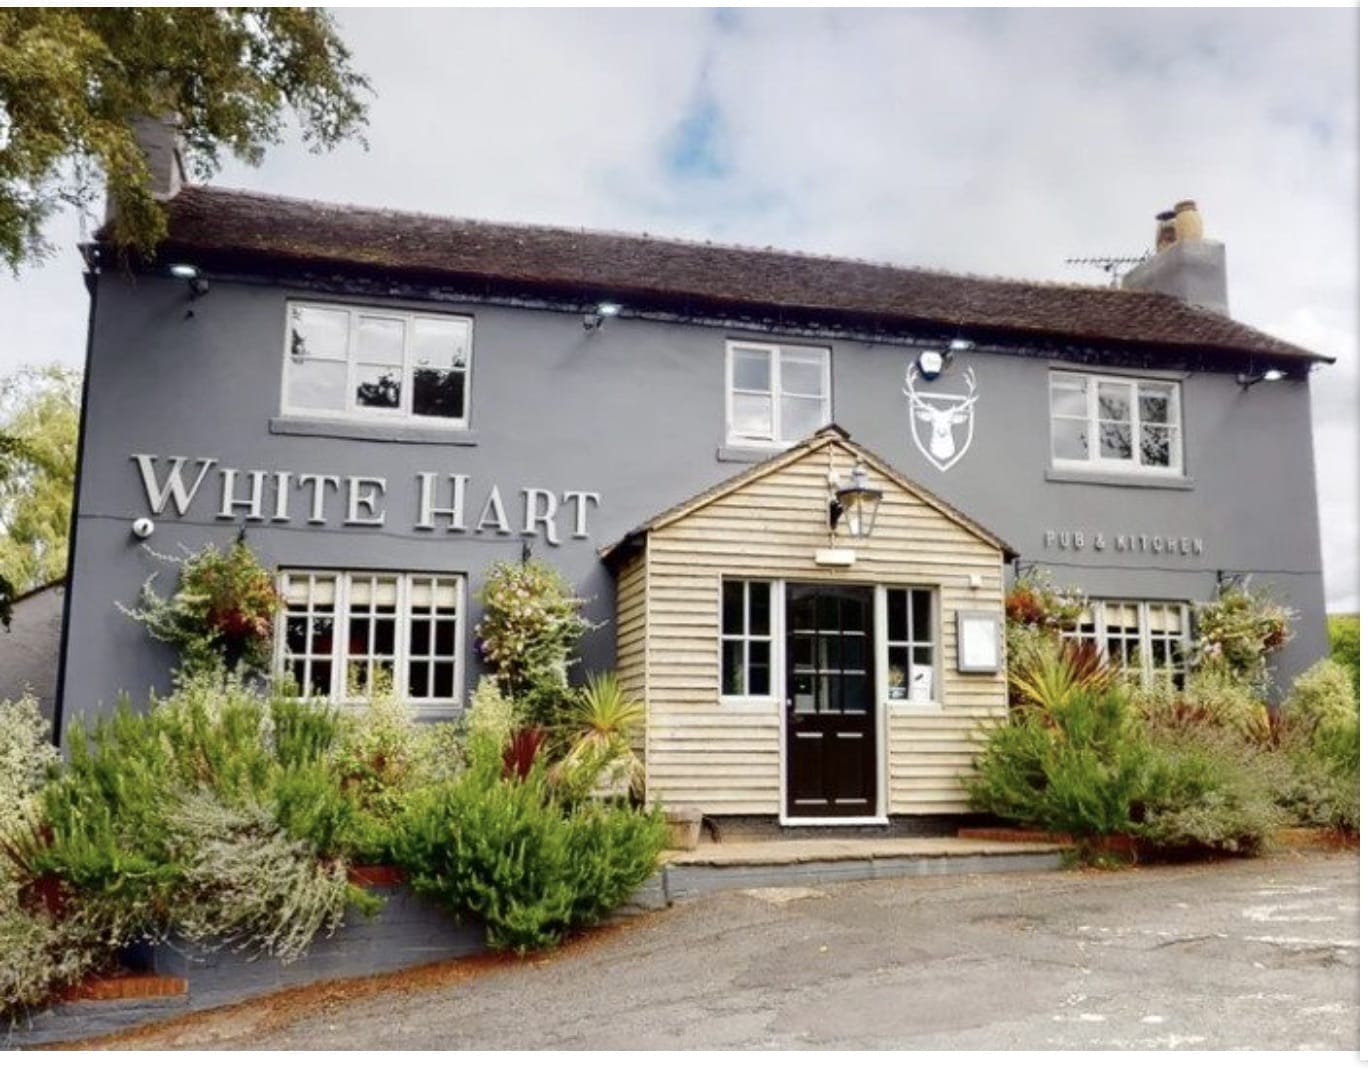 Management Partnership Pubs In Crewe – Run The White Hart !